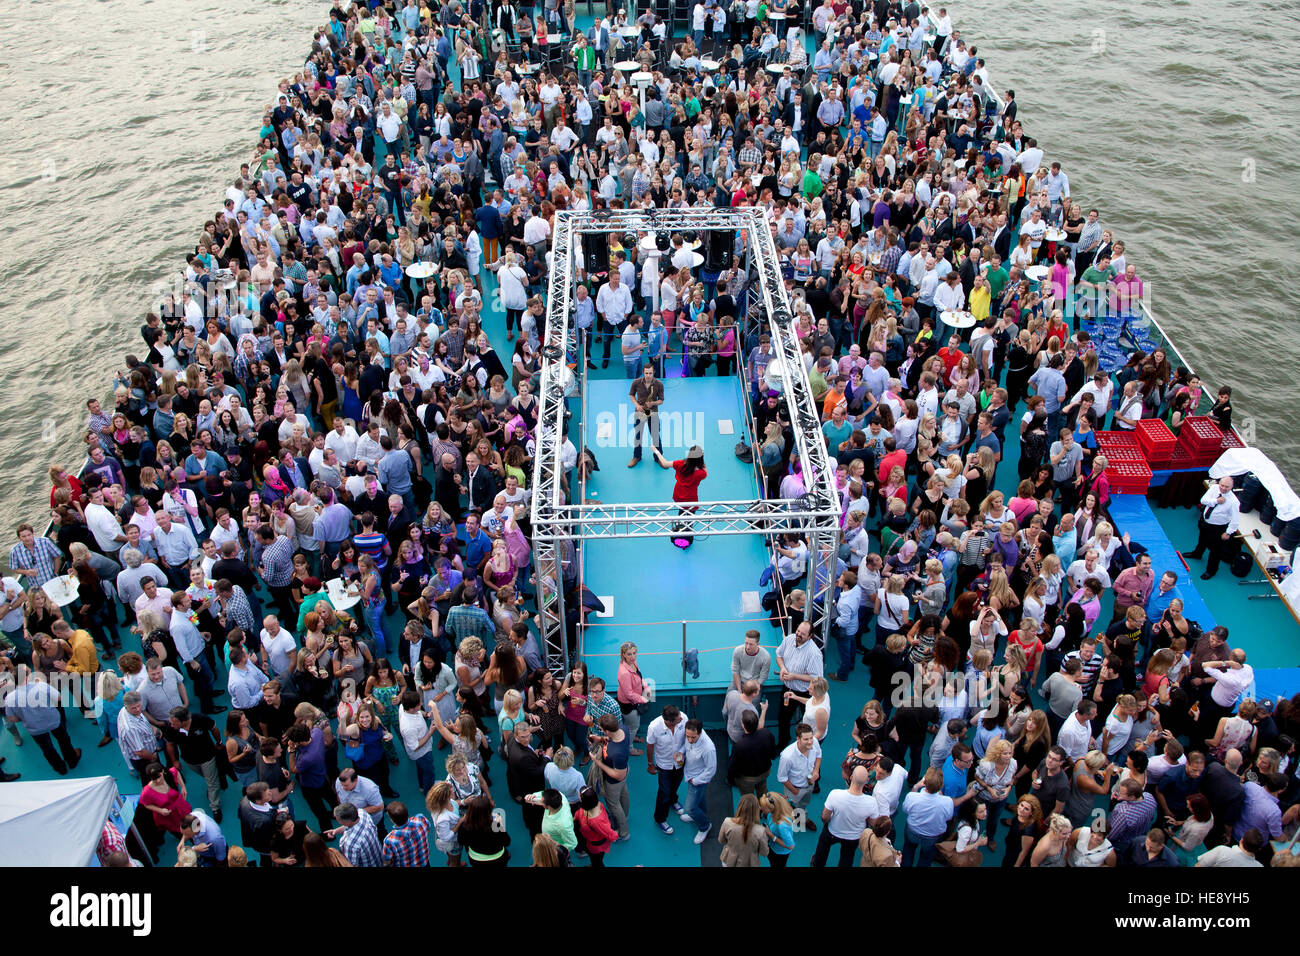 Germany, Cologne, people on the event ship RheinEnergie Stock Photo